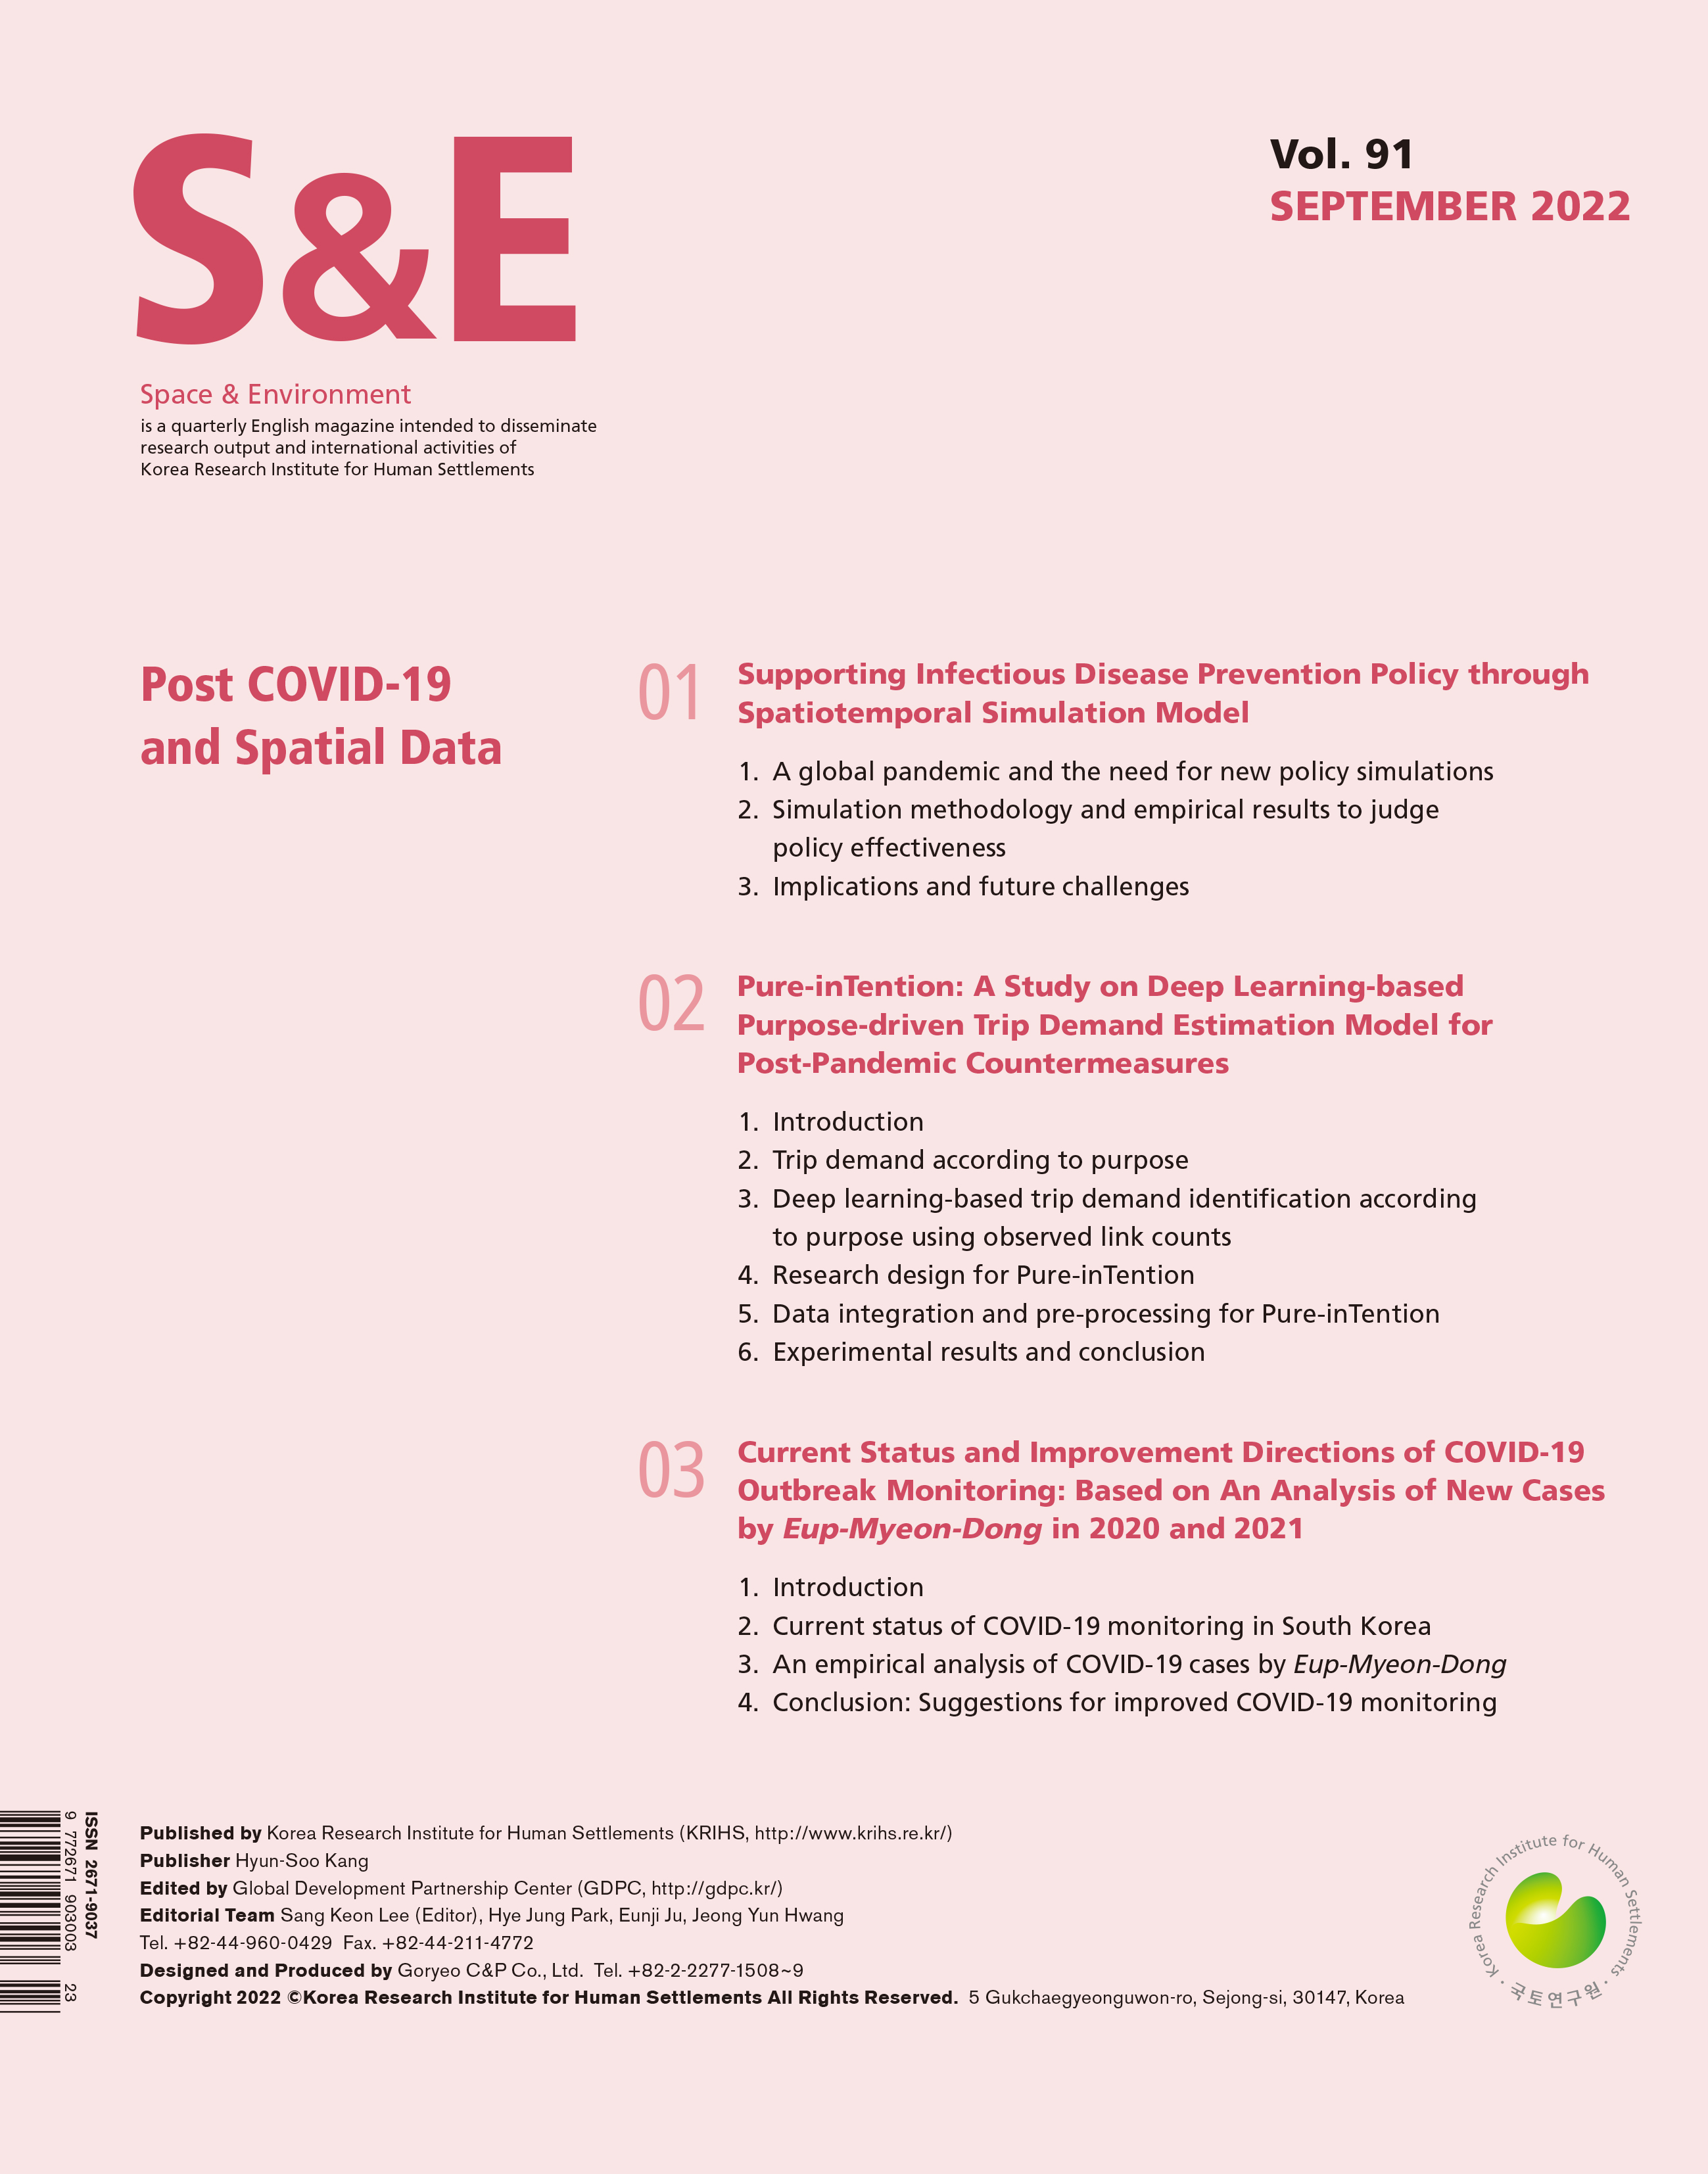 Space & Environment Vol. 91 (September 2022)
Post COVID-19 and Spatial Data